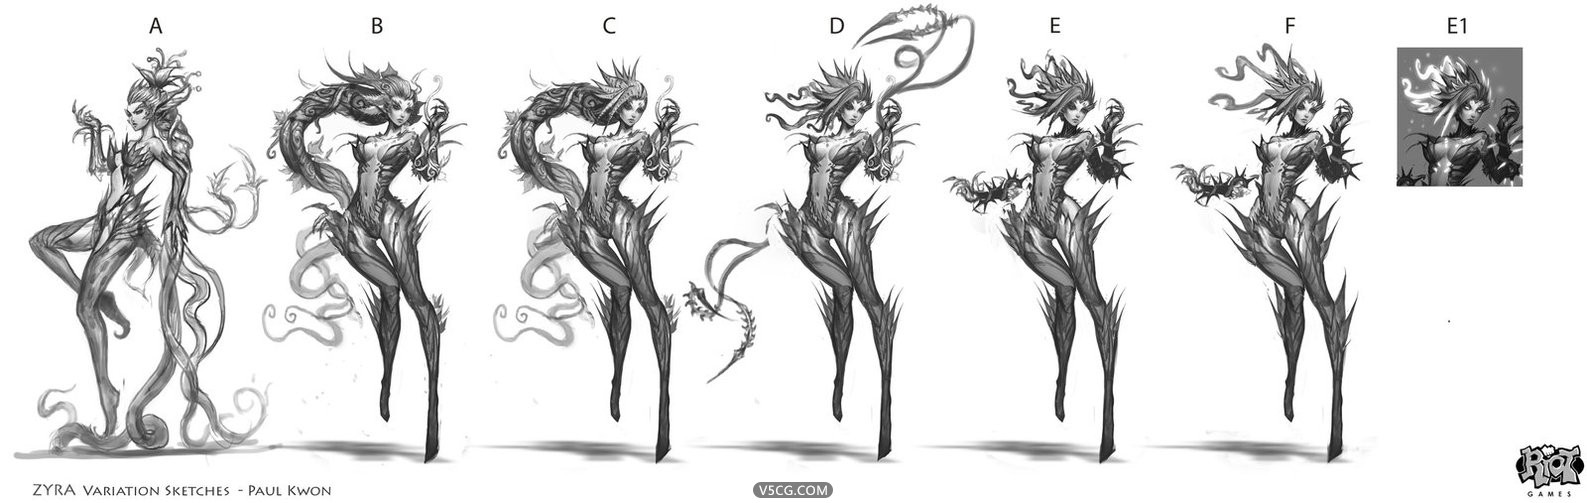 zyra_ideation_sketches_1_by_zeronis-d5micwu.jpg